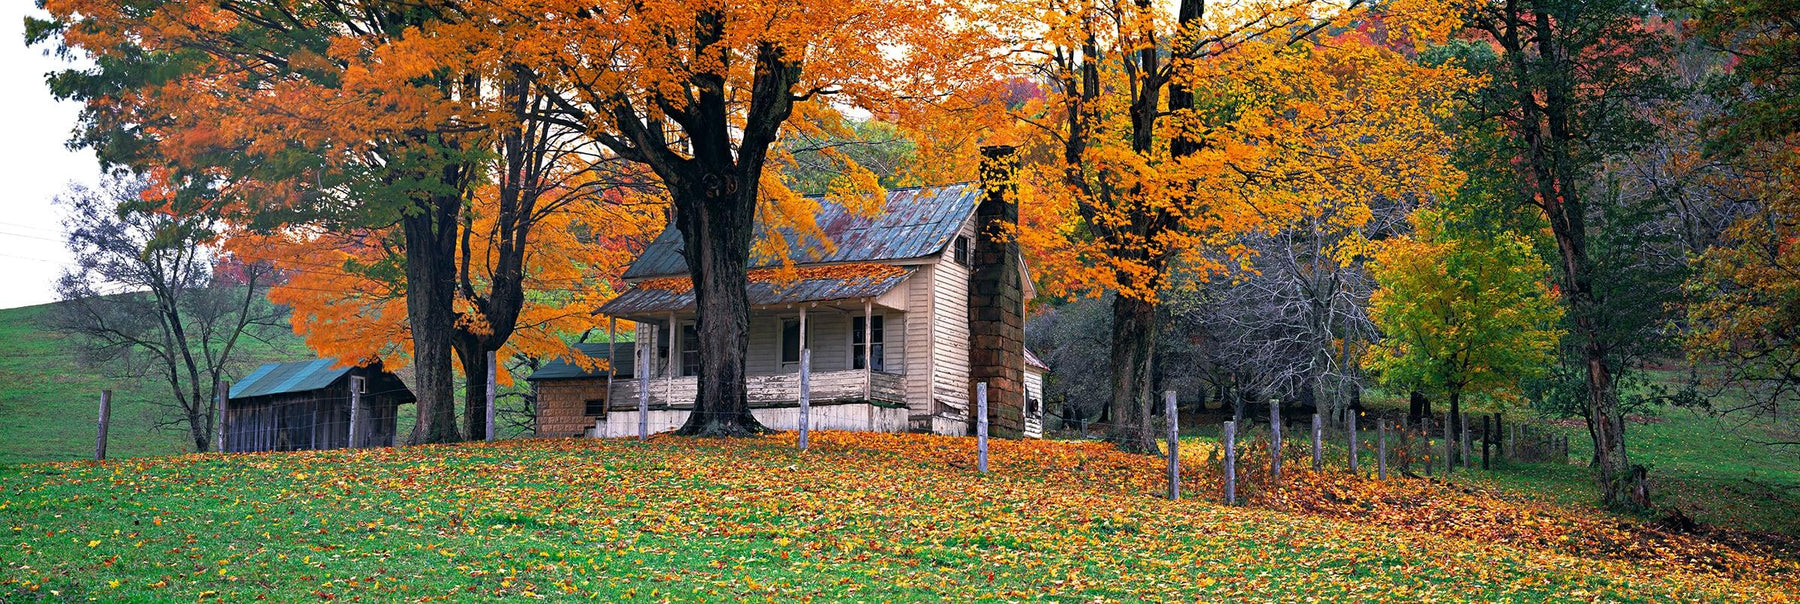 Old cottage and shack surrounded by Autumn colored trees in the leaf covered hills of Meadow River West Virginia